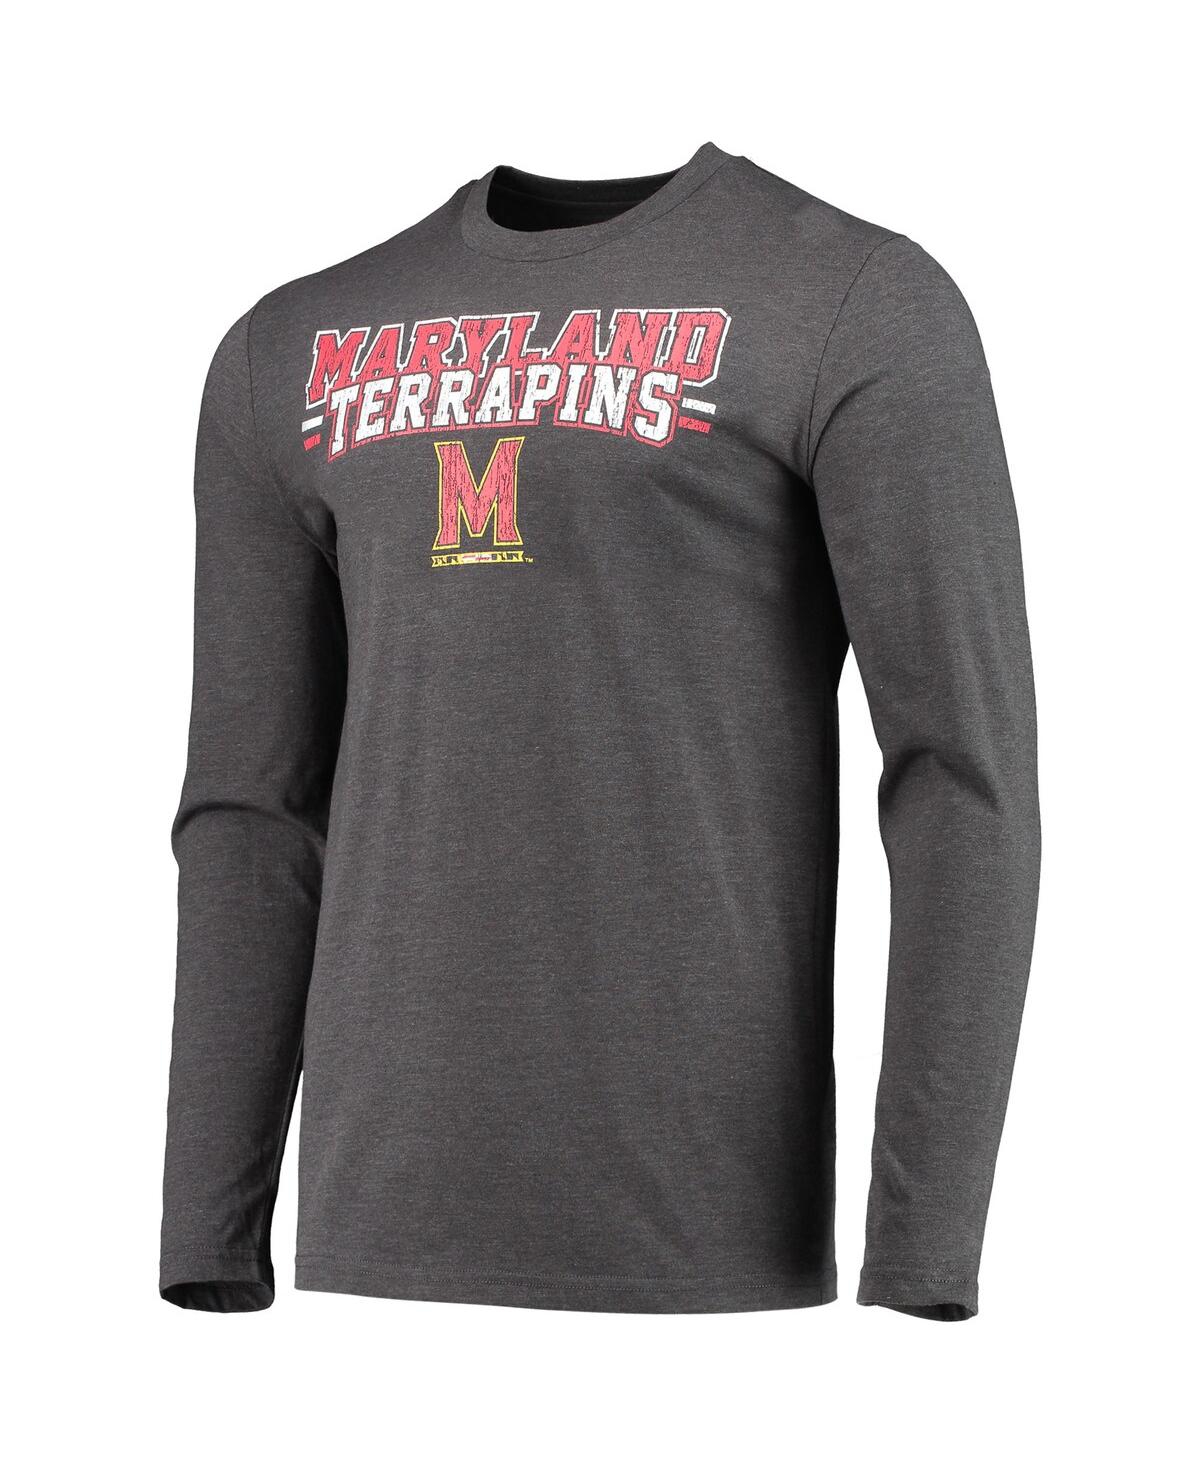 Shop Concepts Sport Men's  Red, Heathered Charcoal Maryland Terrapins Meter Long Sleeve T-shirt And Pants  In Red,heather Charcoal